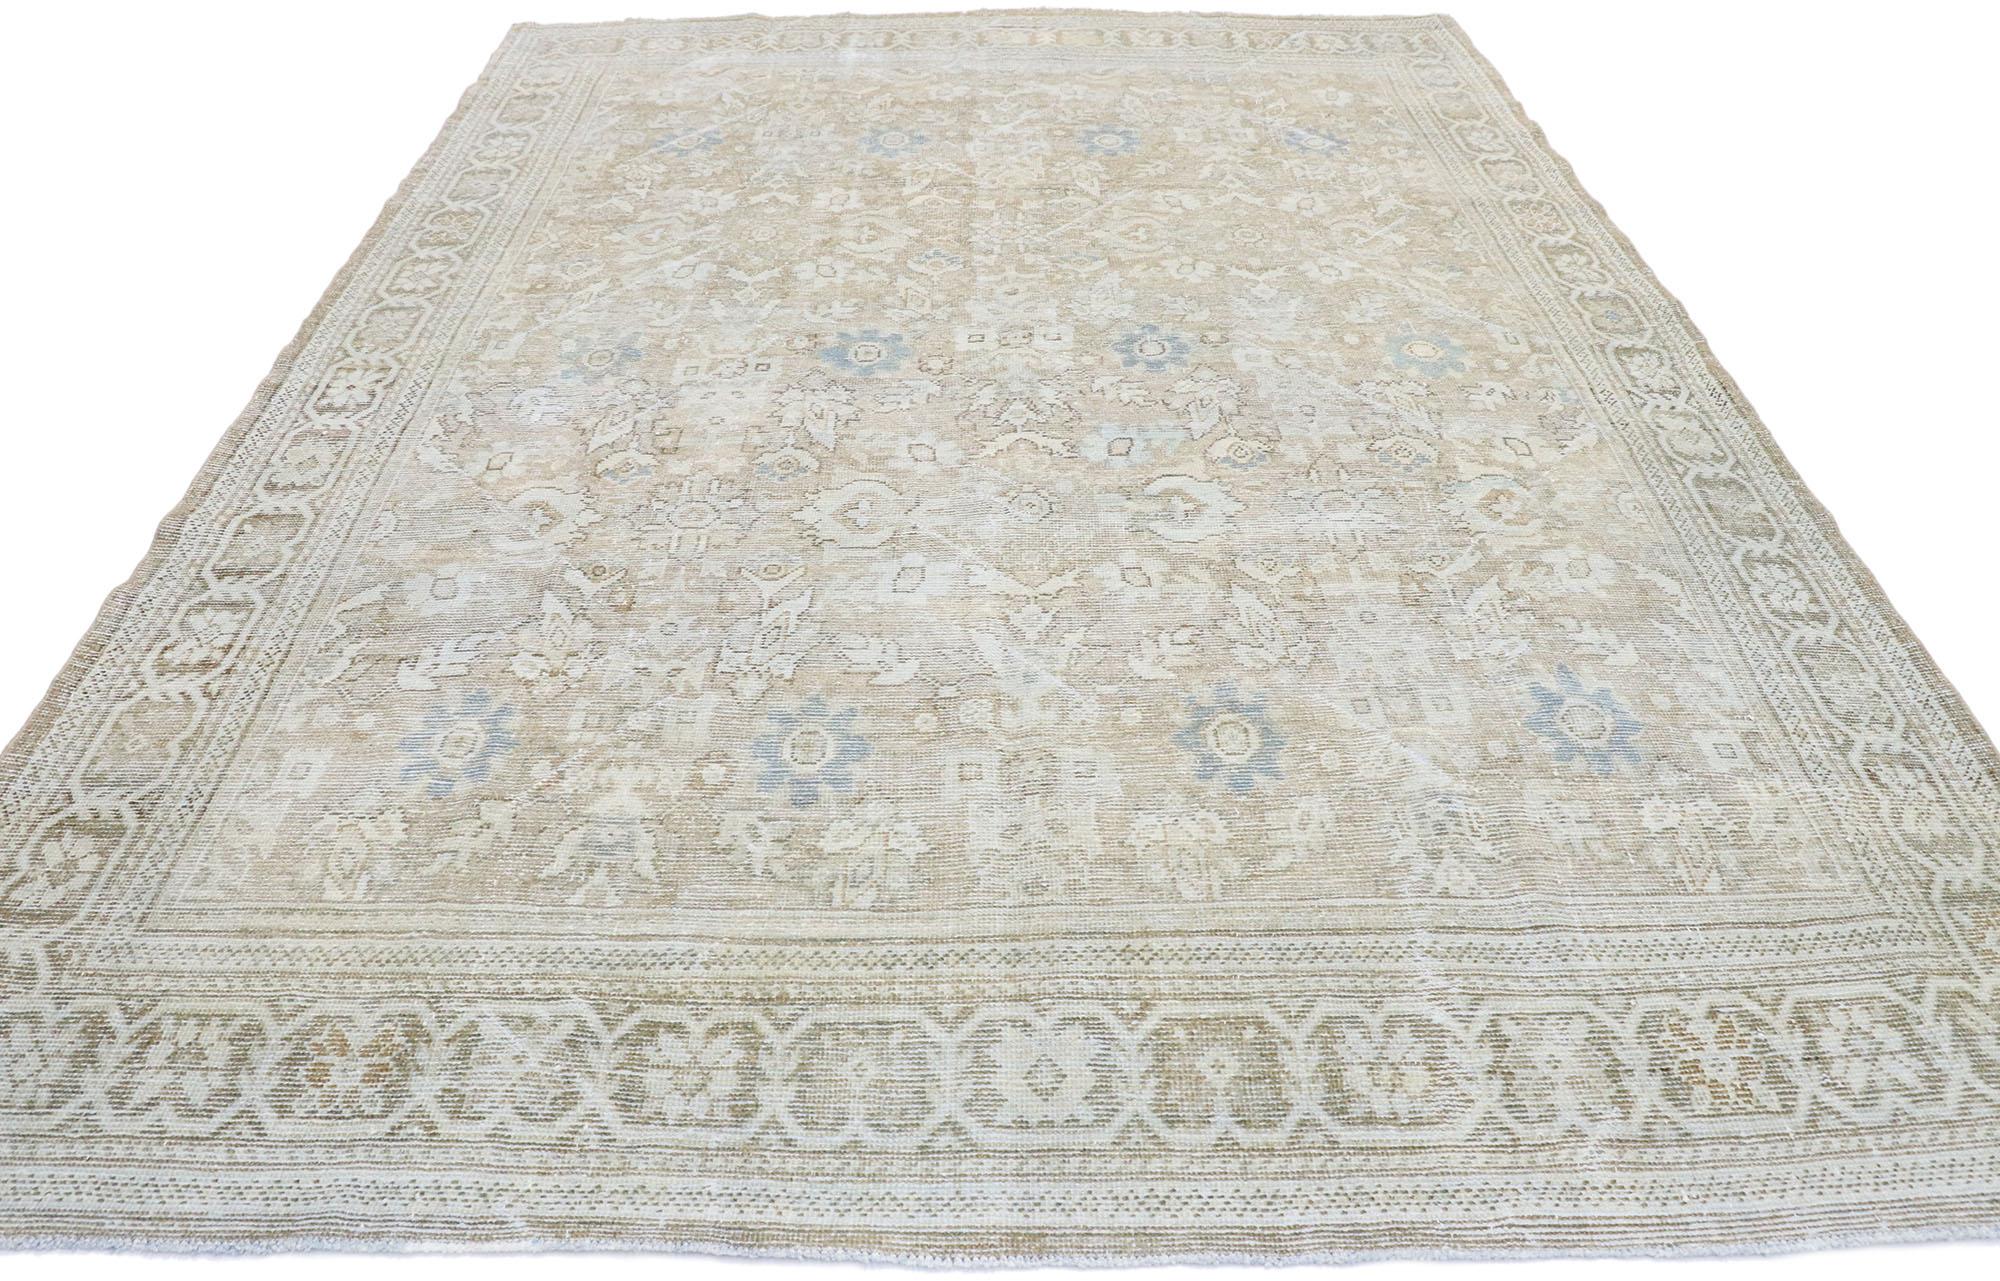 Tabriz Distressed Vintage Persian Mahal Rug with Rustic Hamptons Cottage Style For Sale